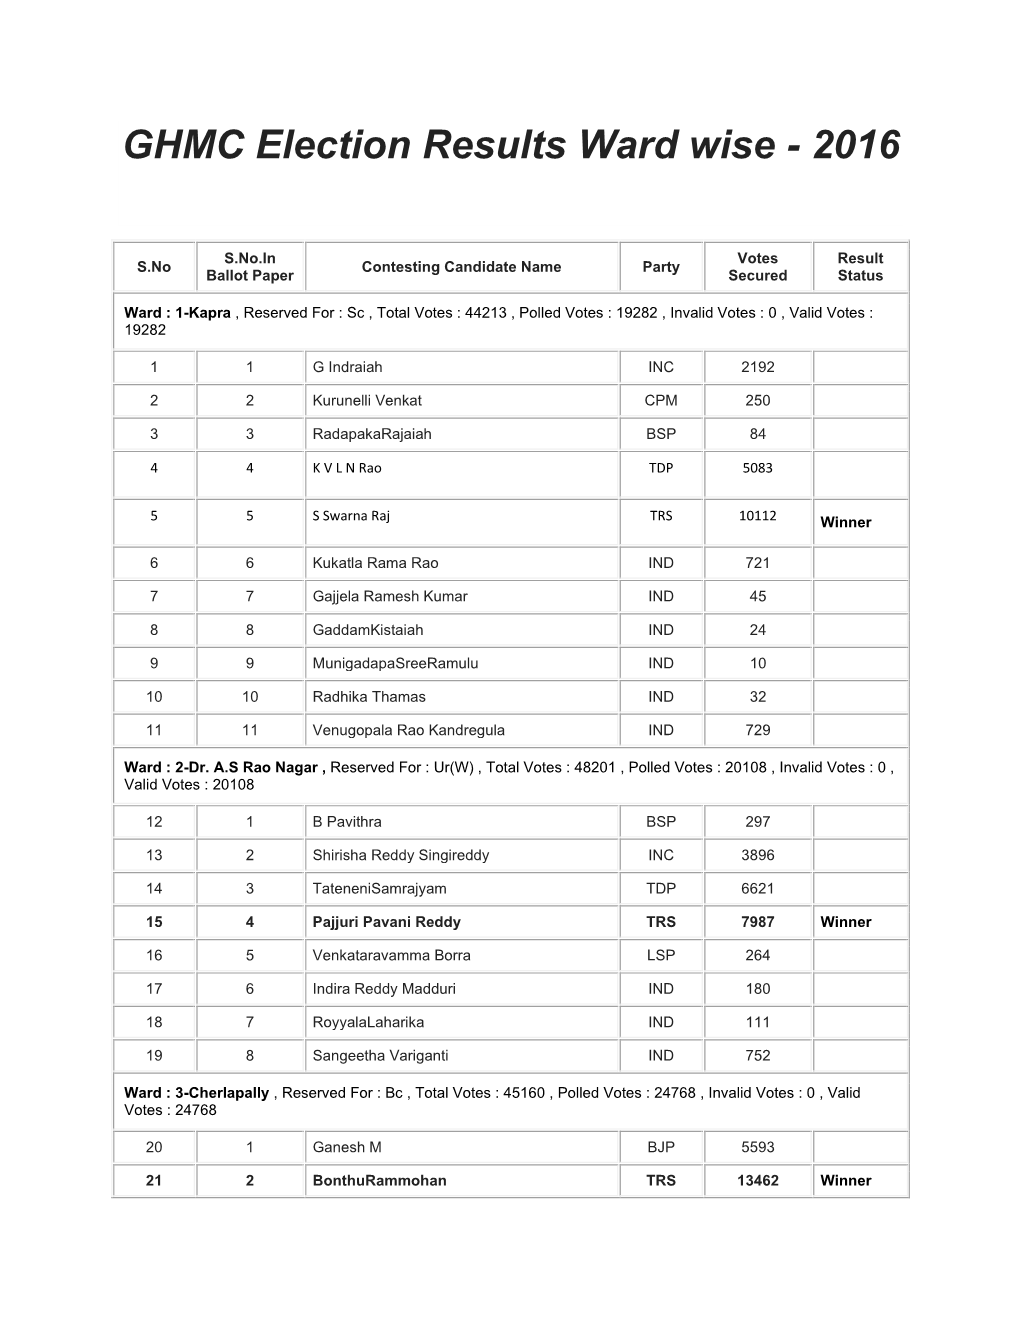 GHMC Election Results Ward Wise - 2016